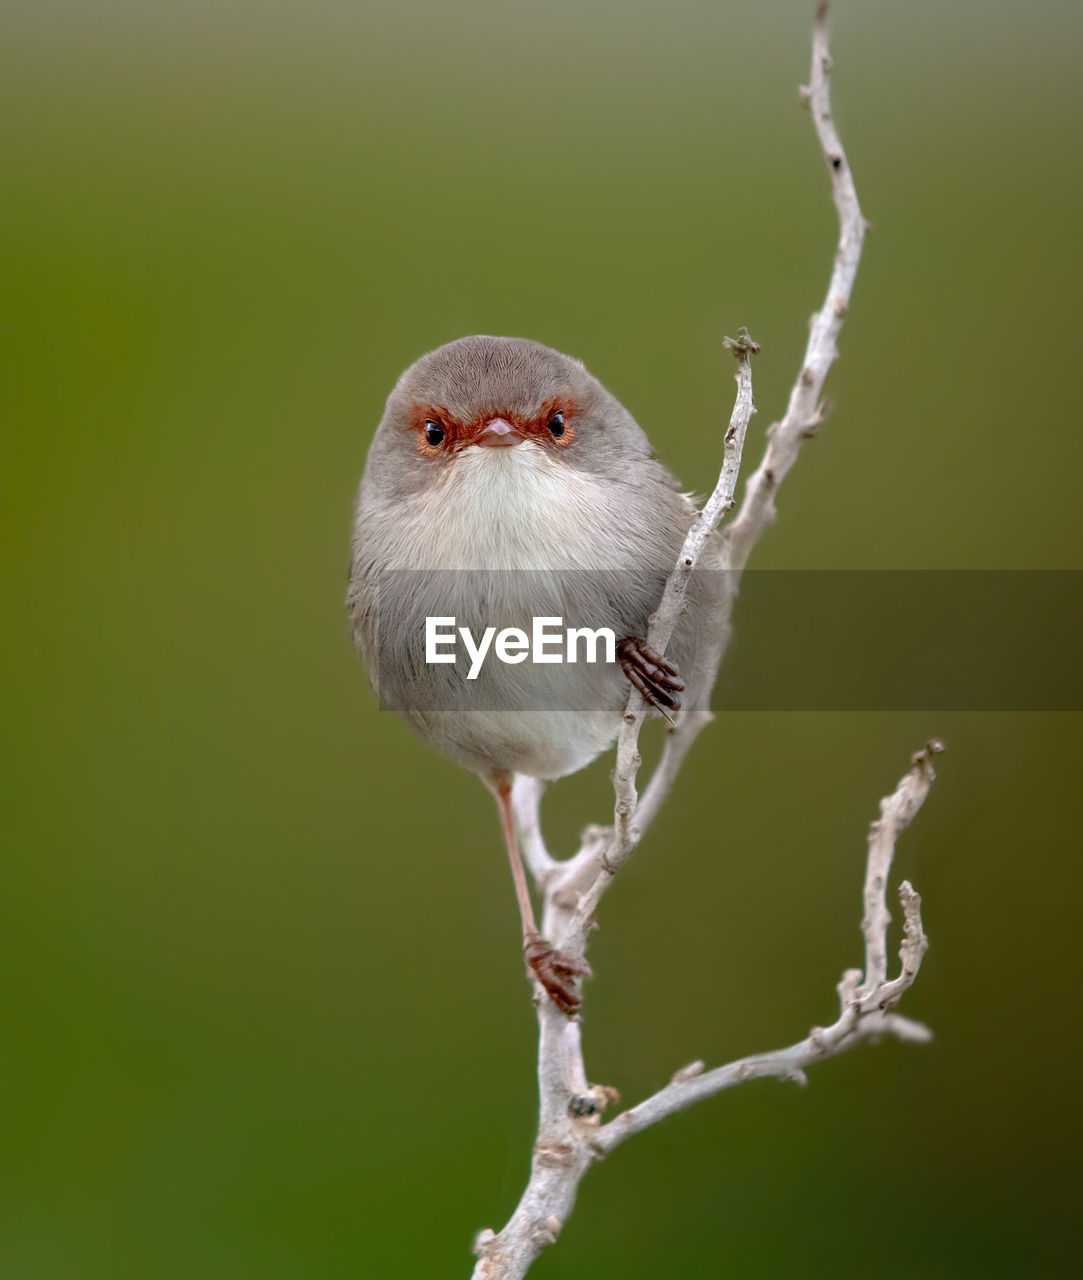 CLOSE-UP OF A BIRD ON BRANCH